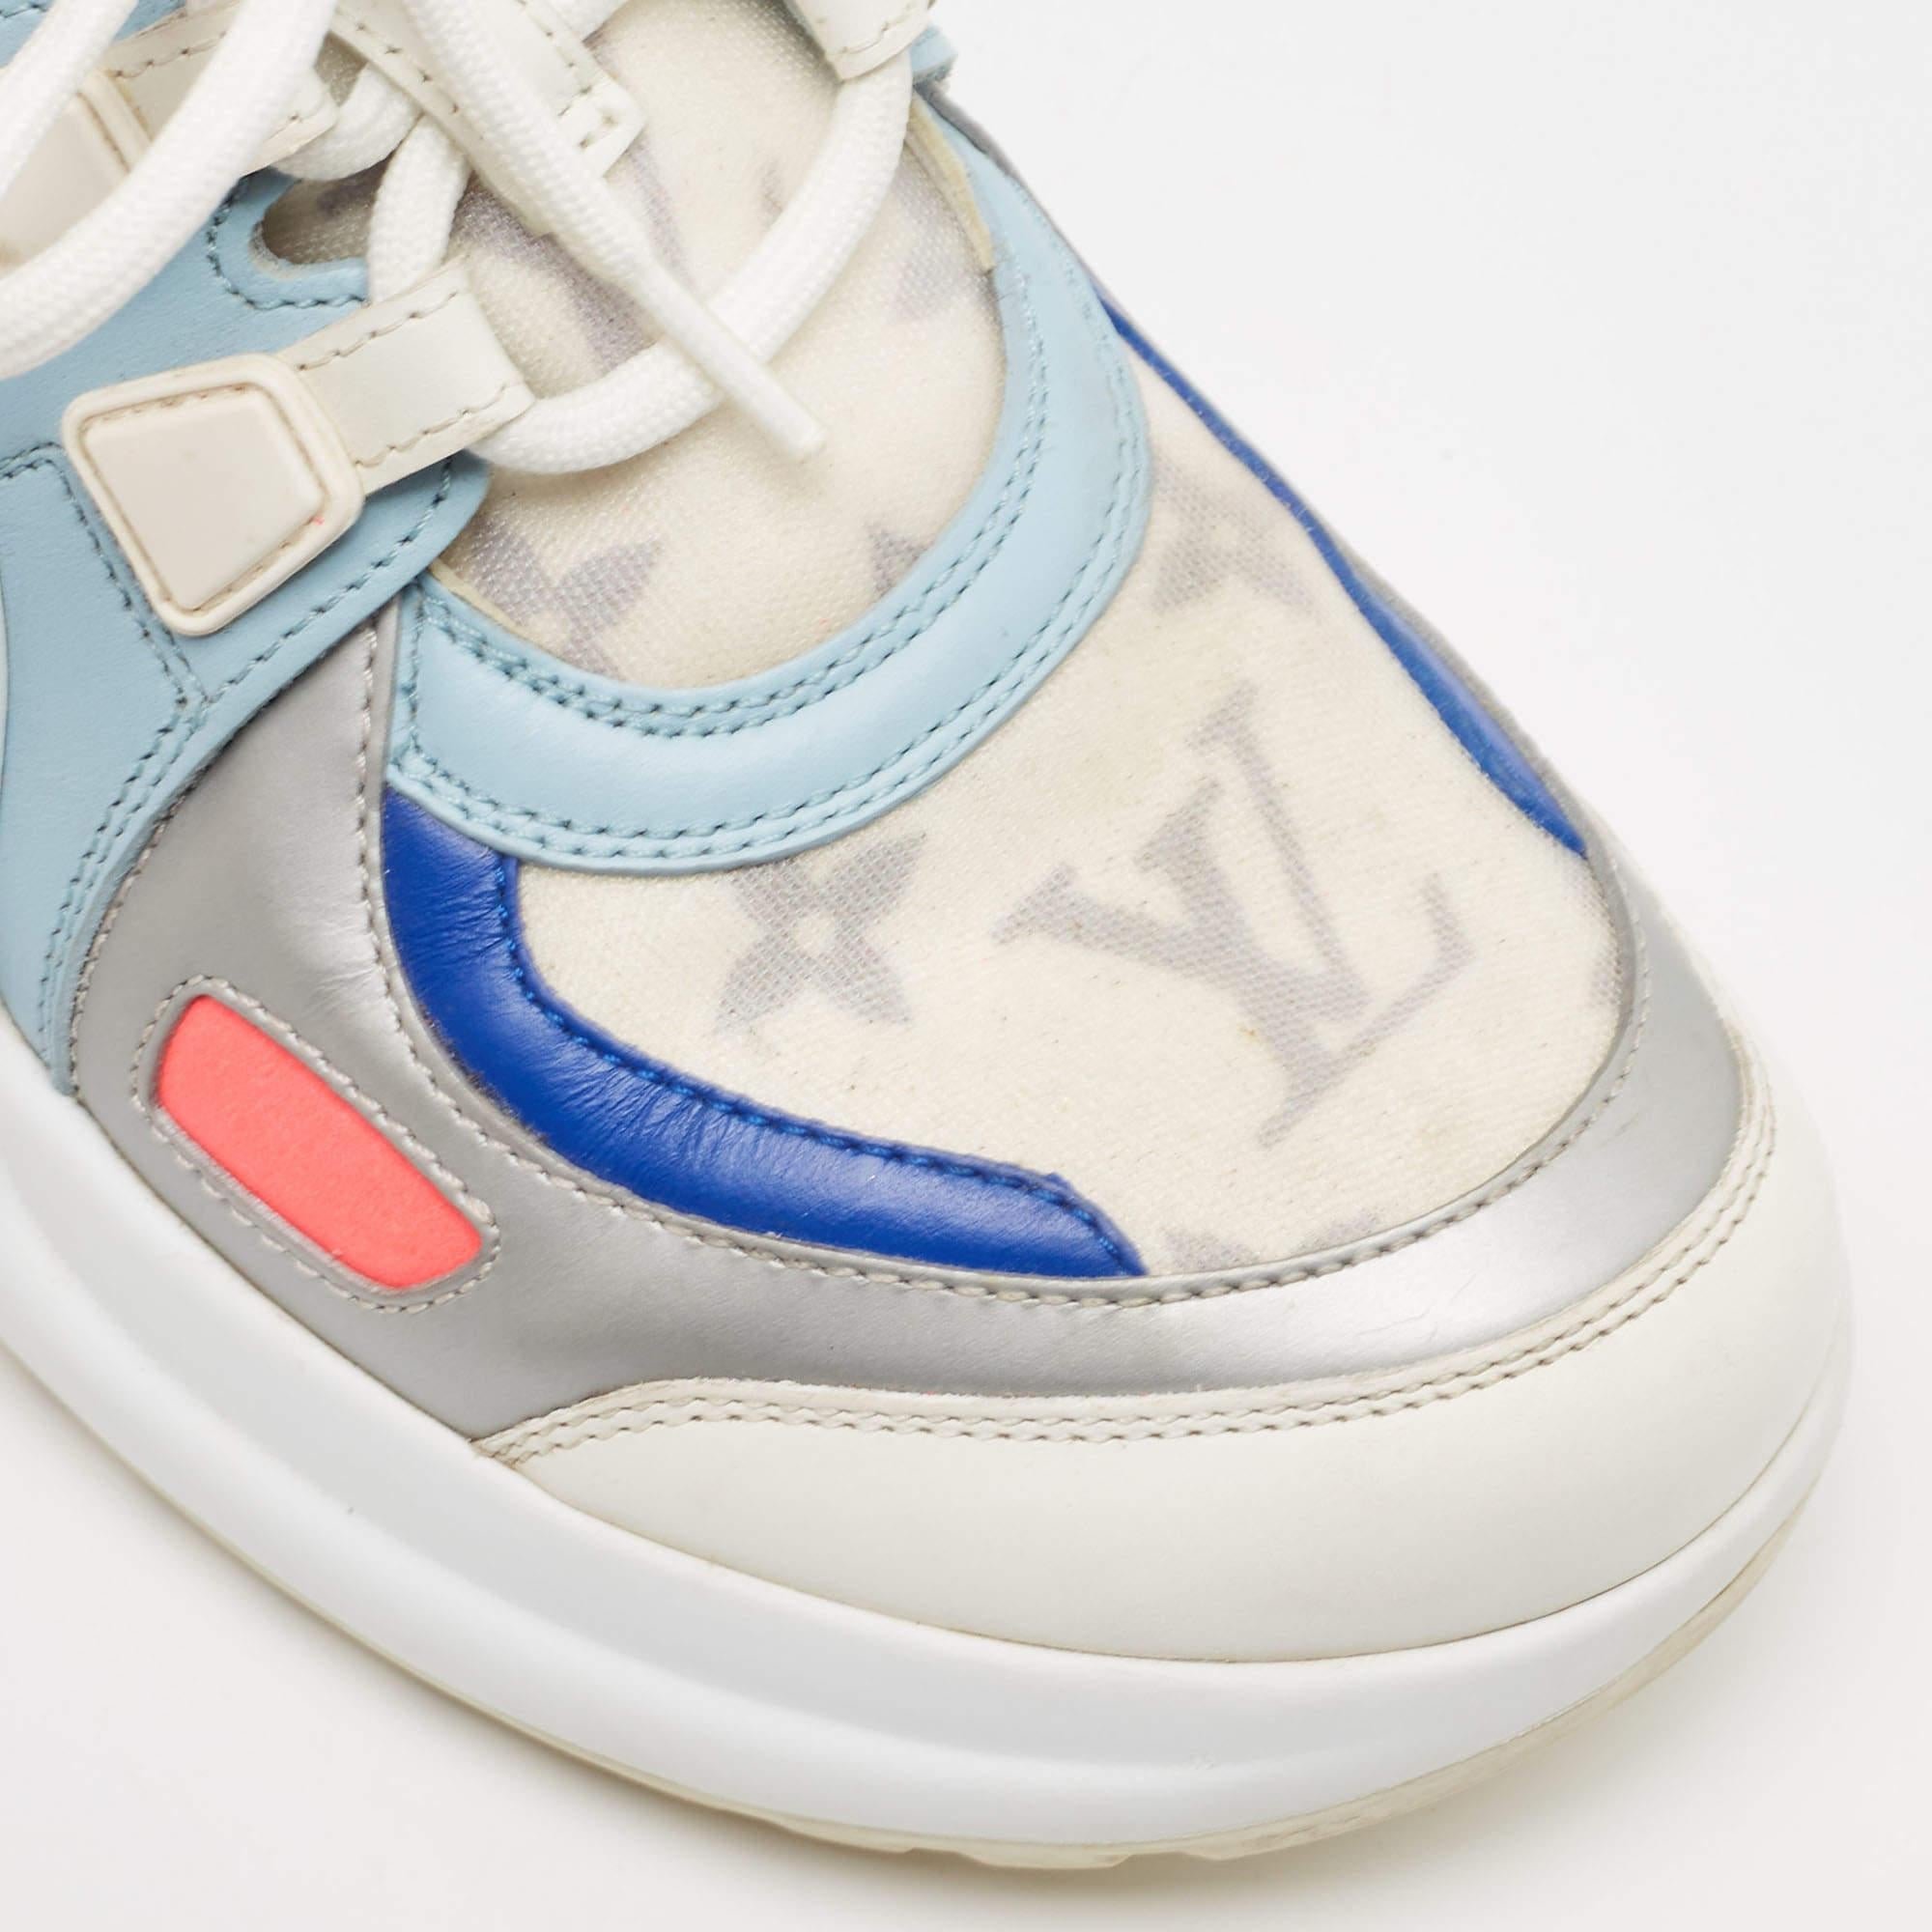 Louis Vuitton Multicolor Leather and Mesh Archlight Sneakers Size 36 For Sale 5